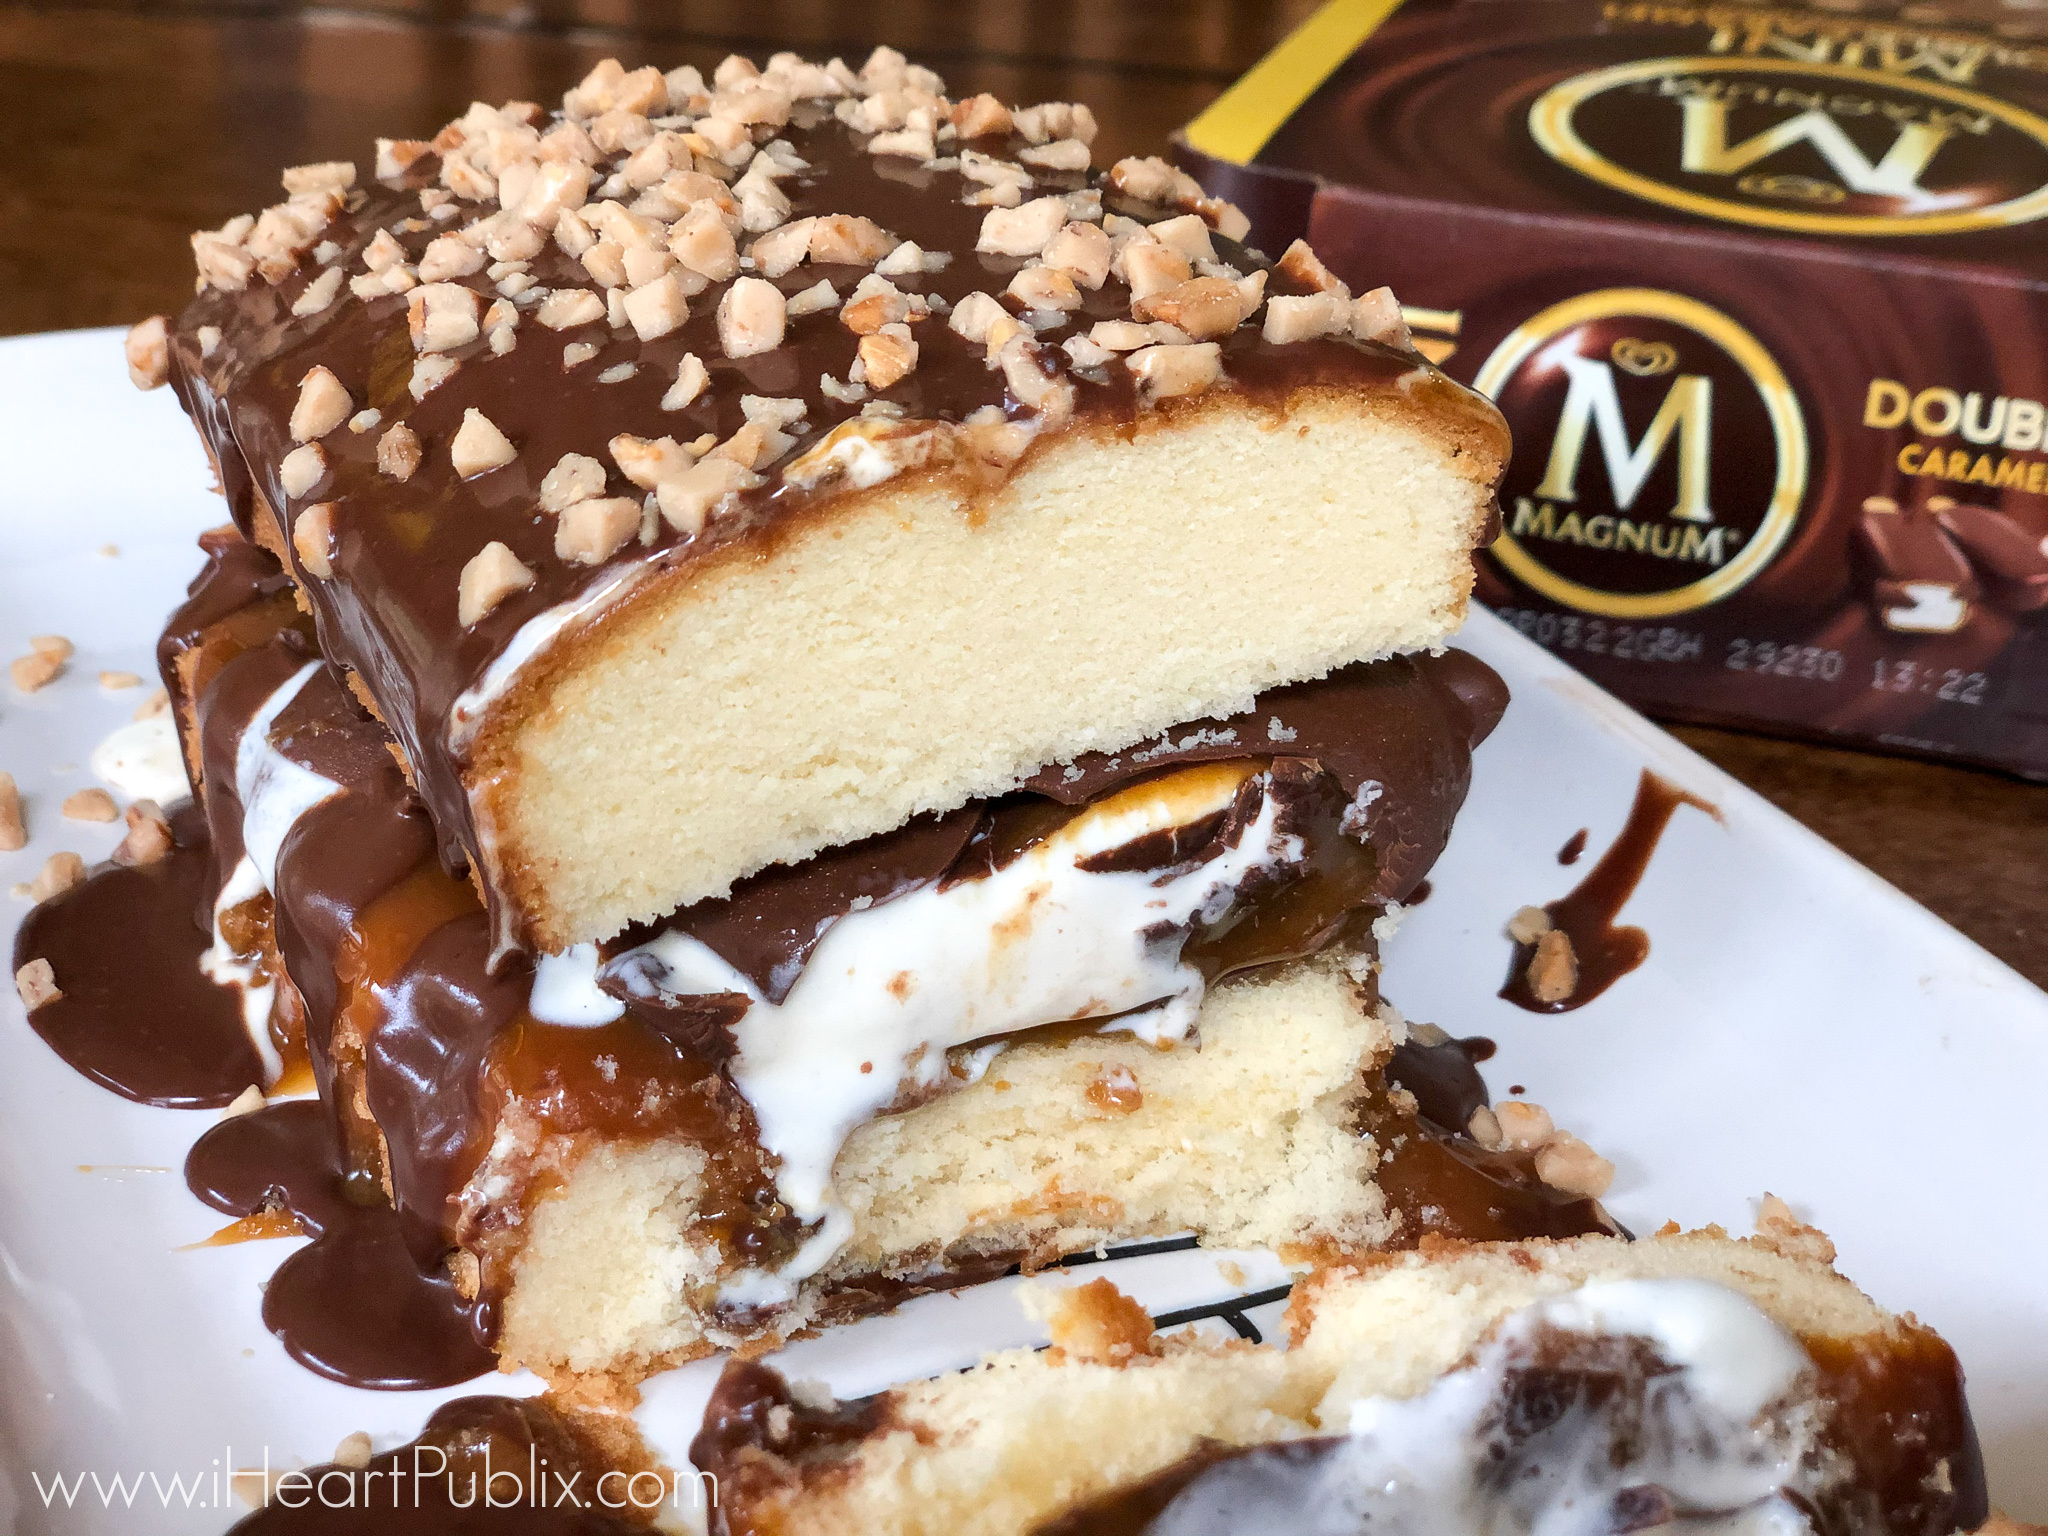 Magnum Chocolate & Caramel Overload Cake - Indulgent Dessert For The Amazing Ice Cream Deals Available Now At Publix on I Heart Publix